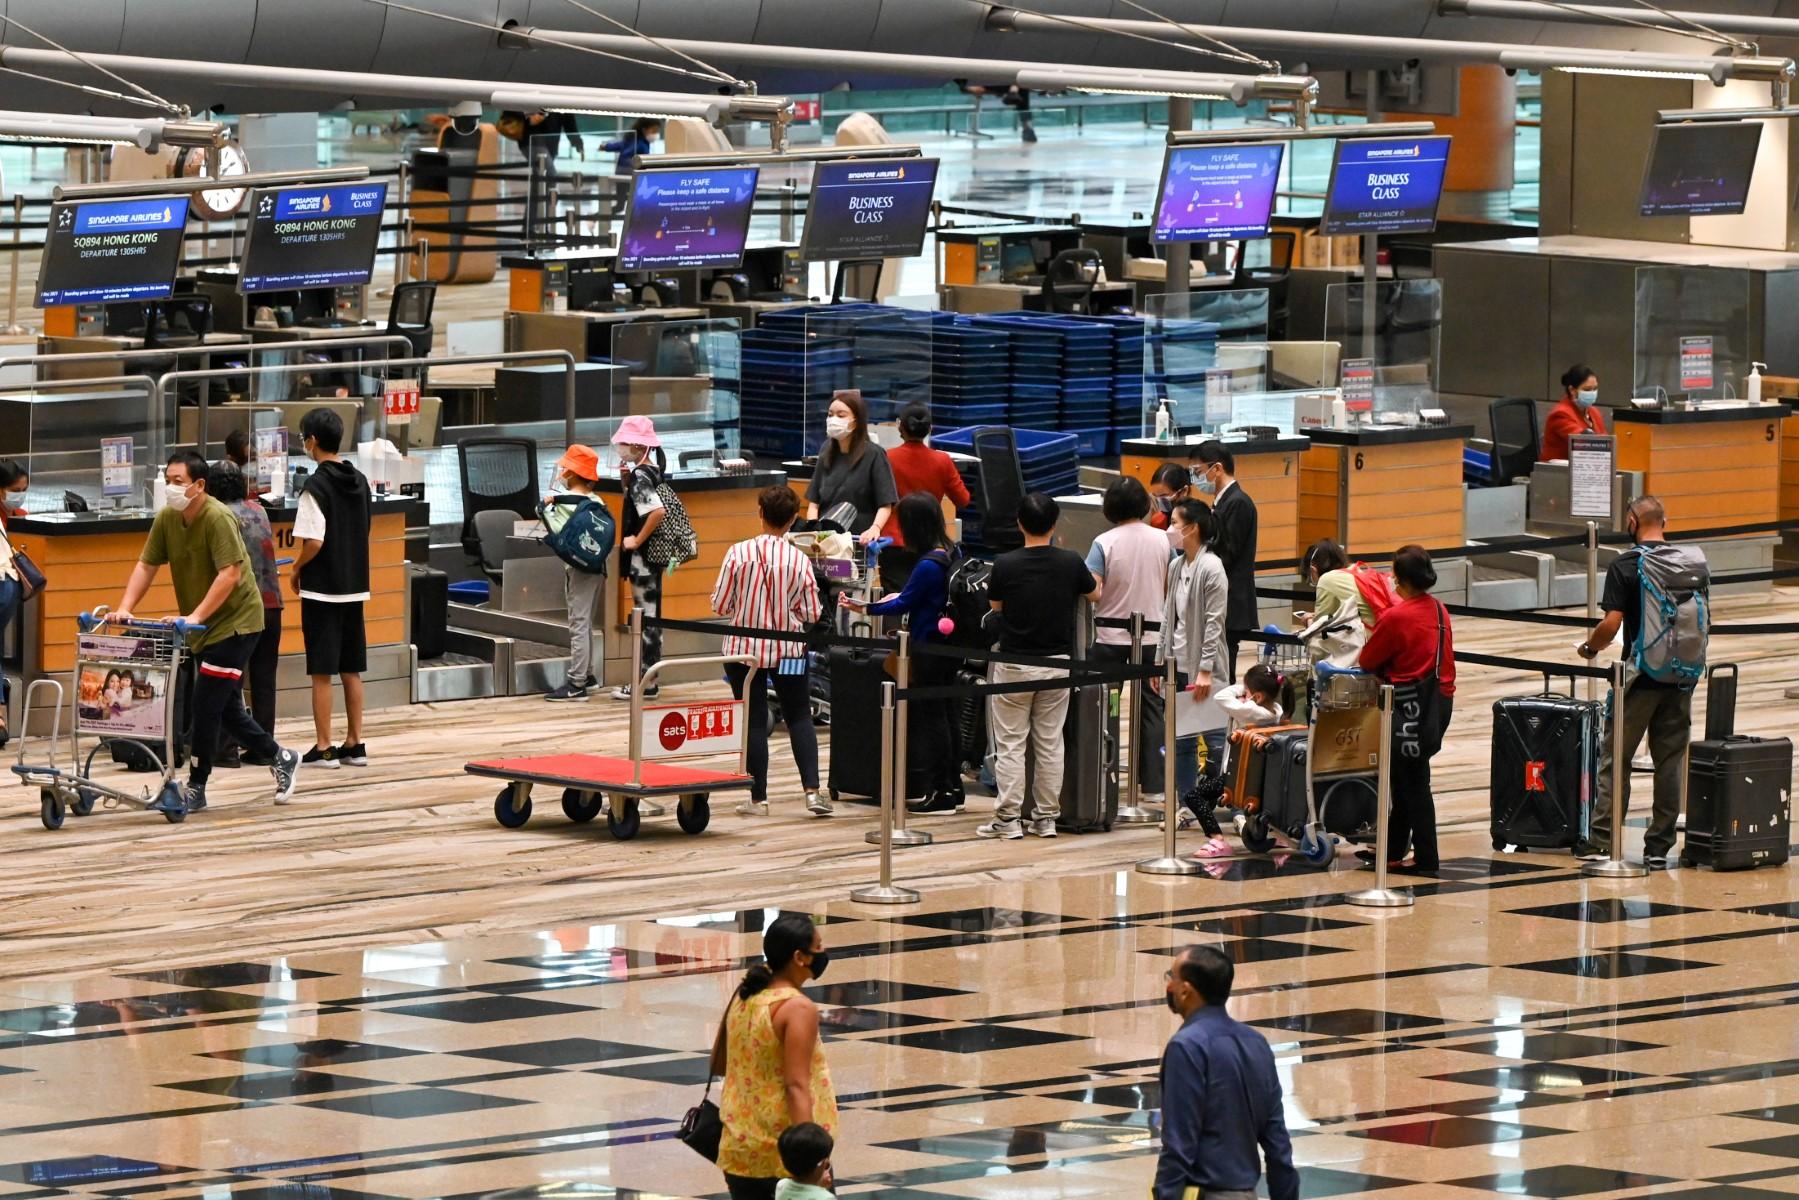 Travellers check in for their flight at the Singapore Airlines counter in the departure hall at Changi International Airport in Singapore on Dec 2. Photo: AFP